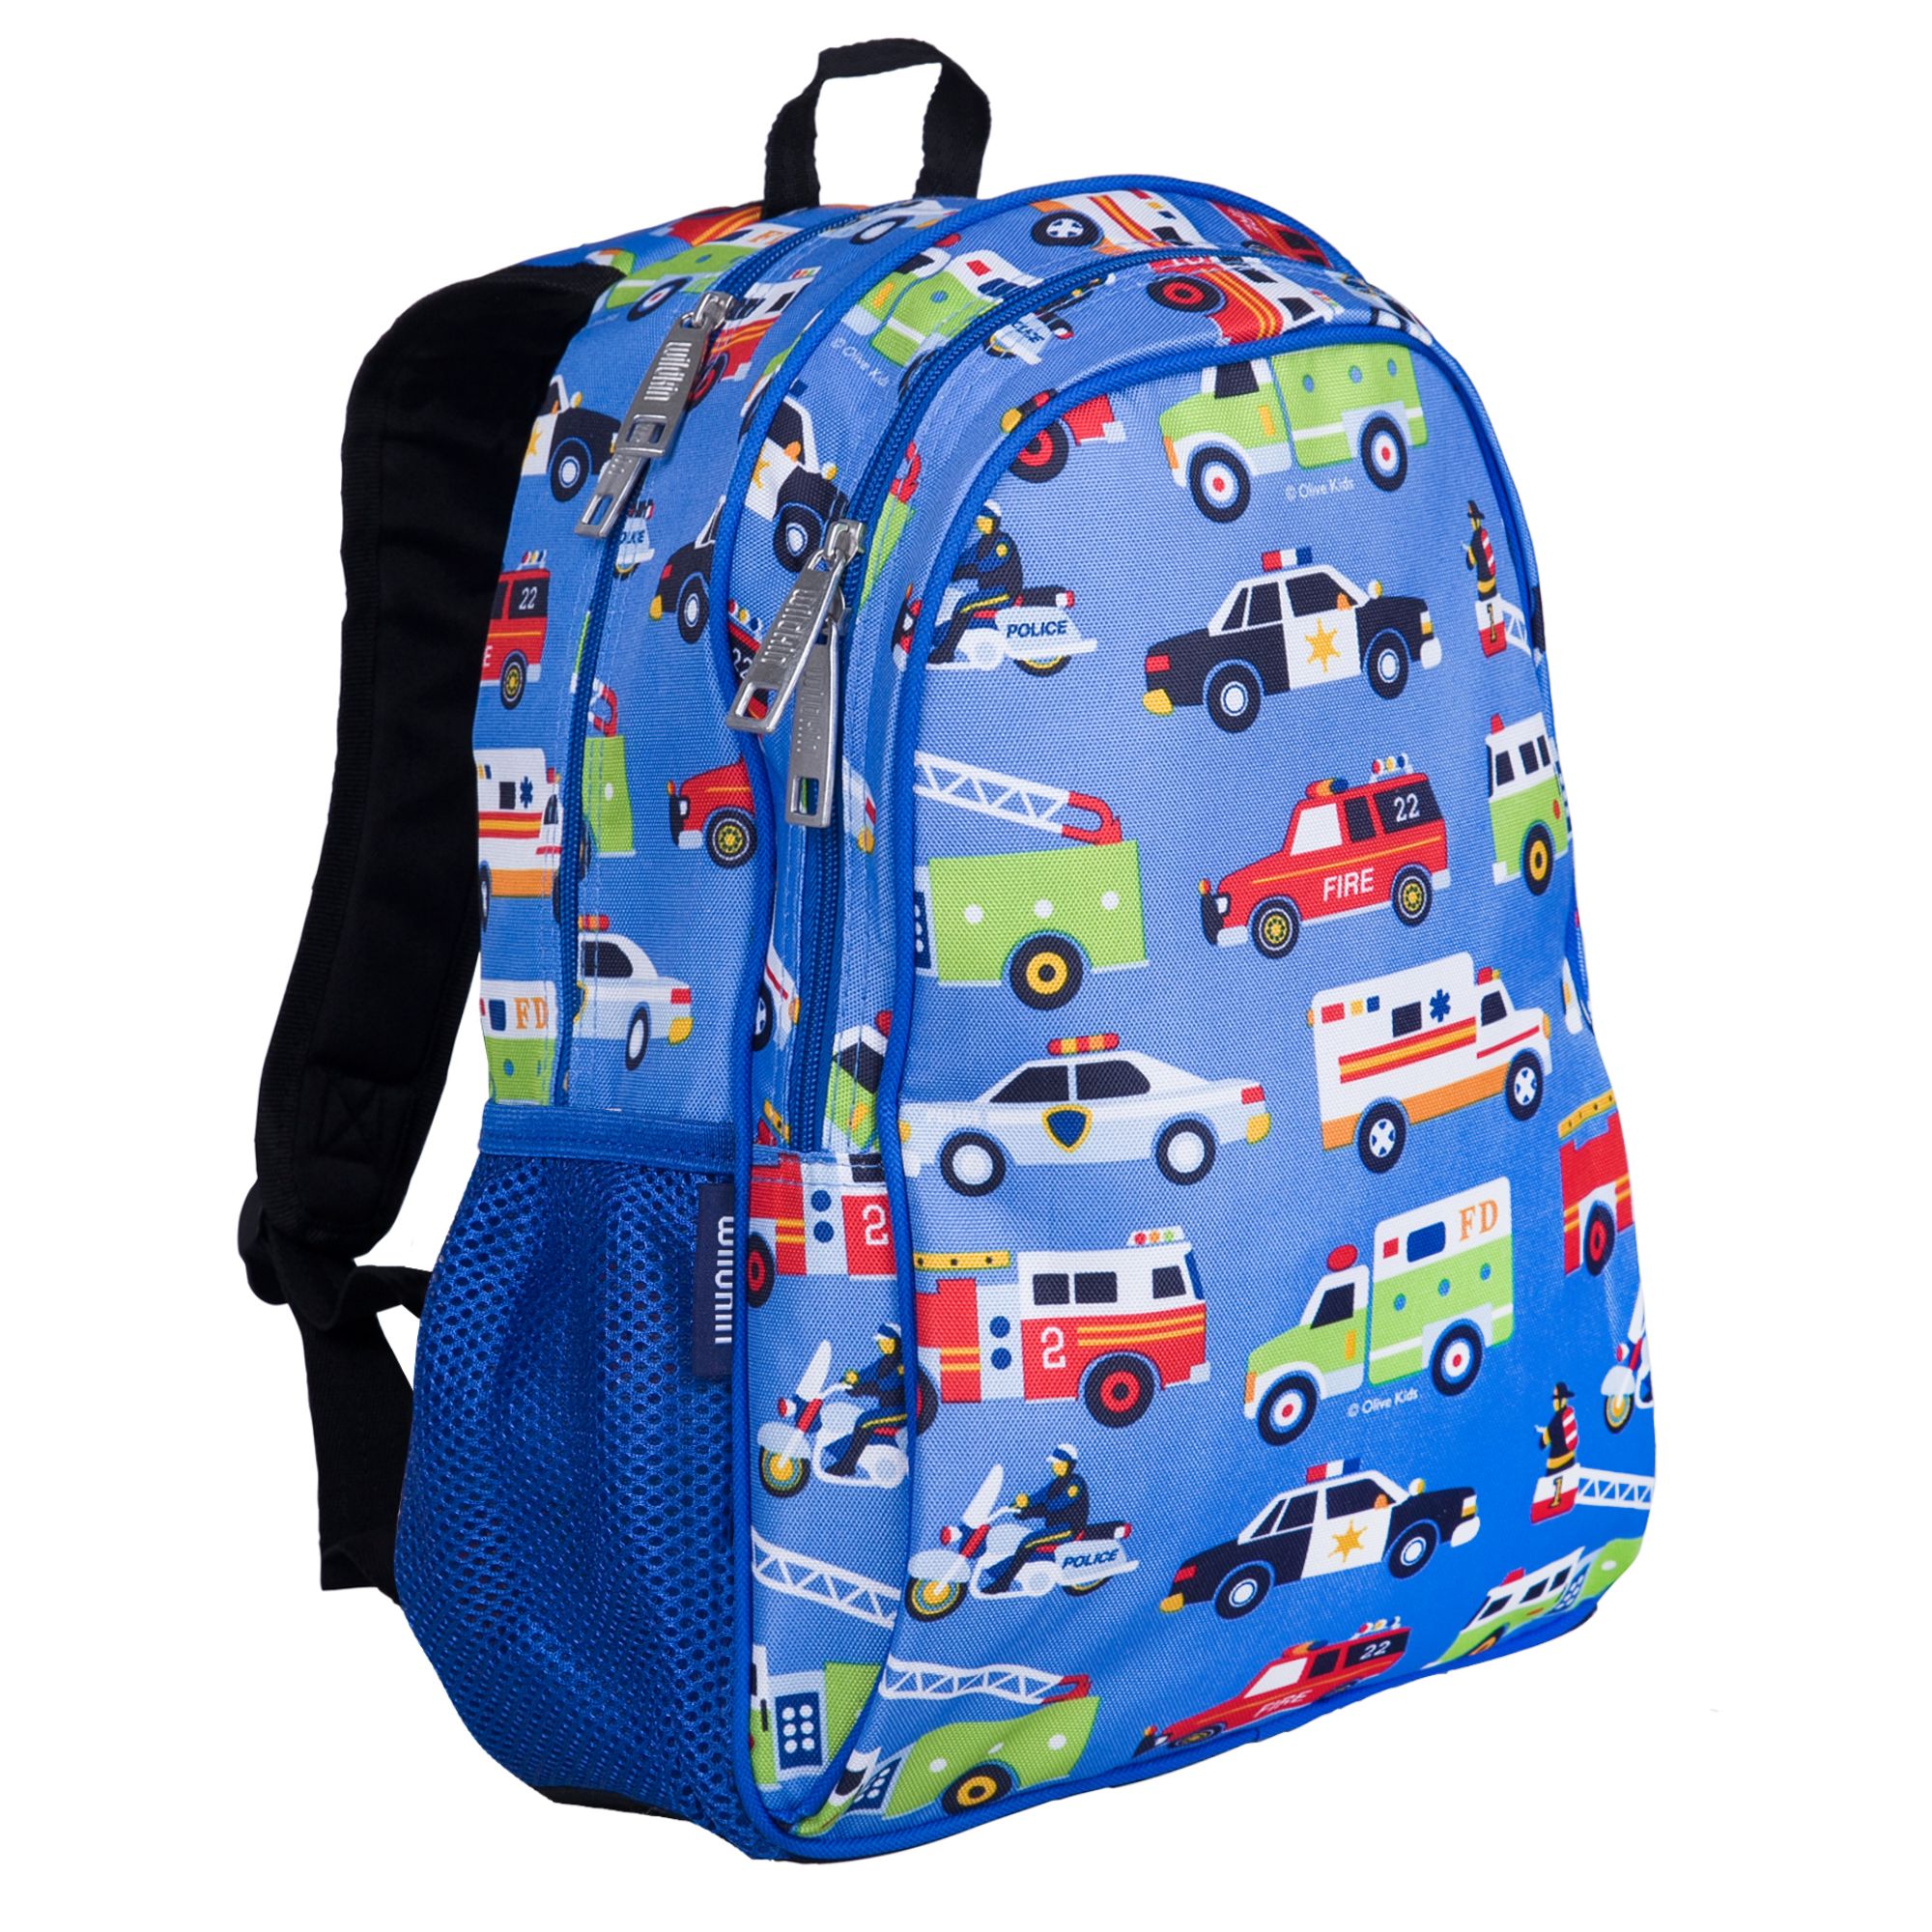 Wildkin Kids 15 Inch School and Travel Backpack for Boys and Girls (Heroes Blue) - image 1 of 7